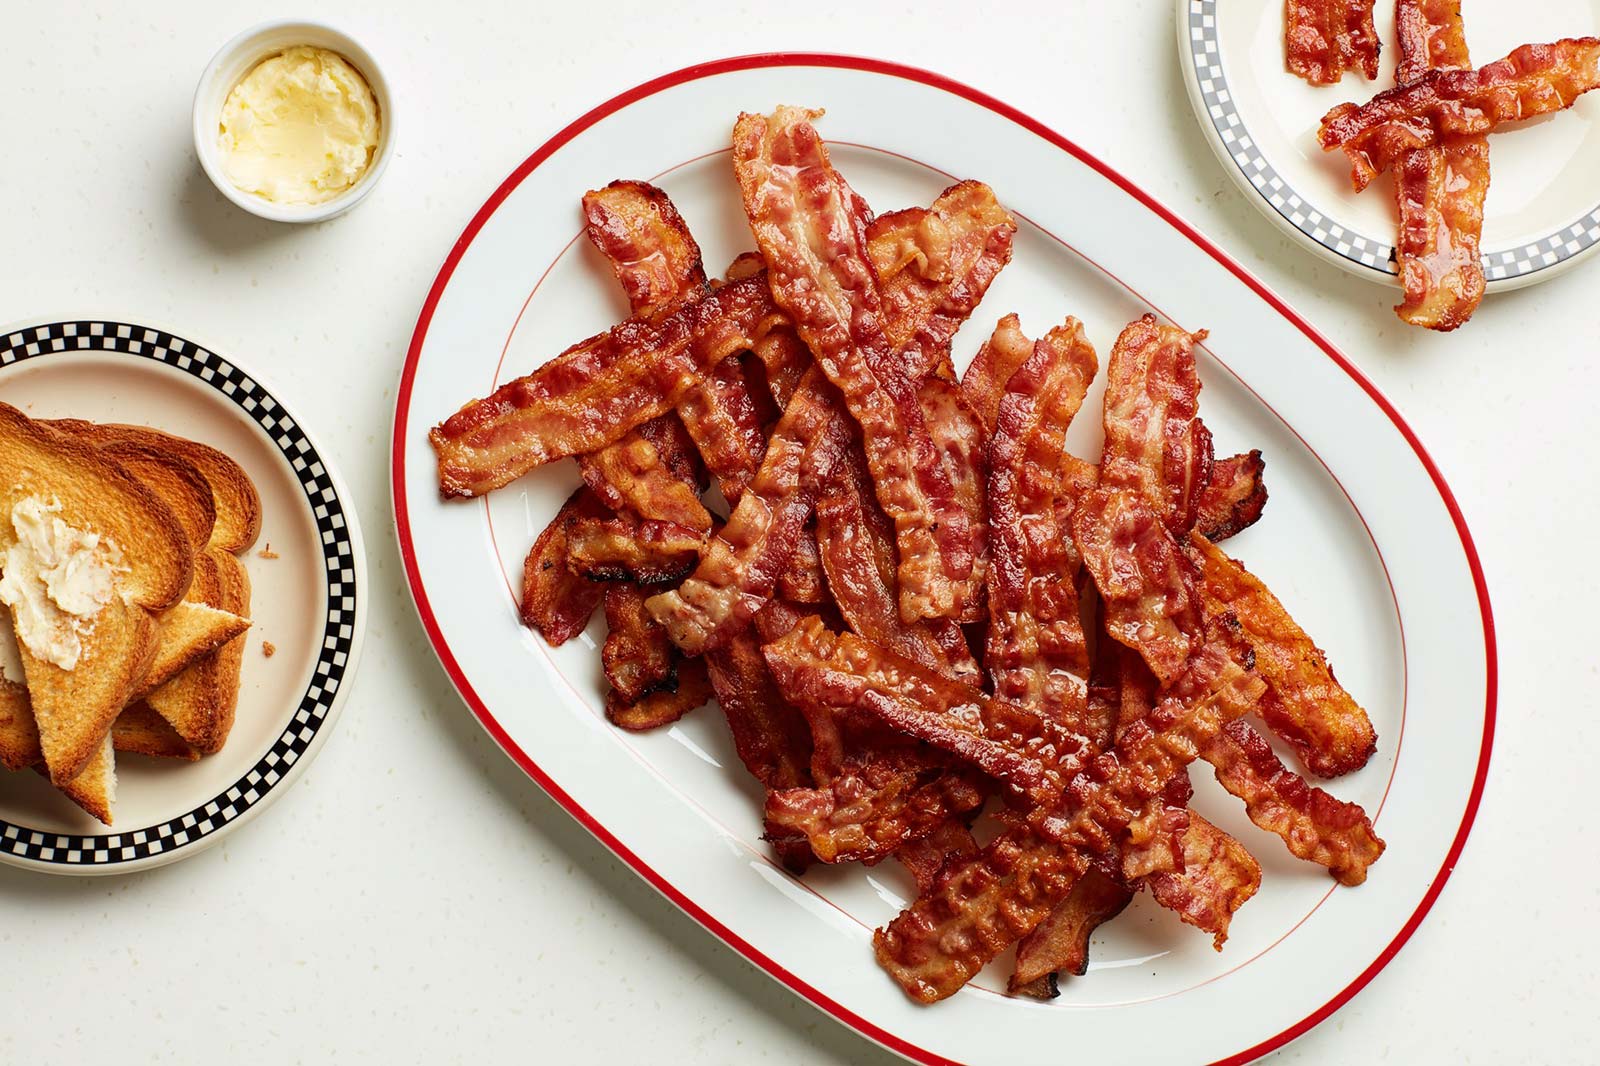 🍖 Can We Guess Your Age and Gender Based on the Meats You’ve Eaten? Bacon1